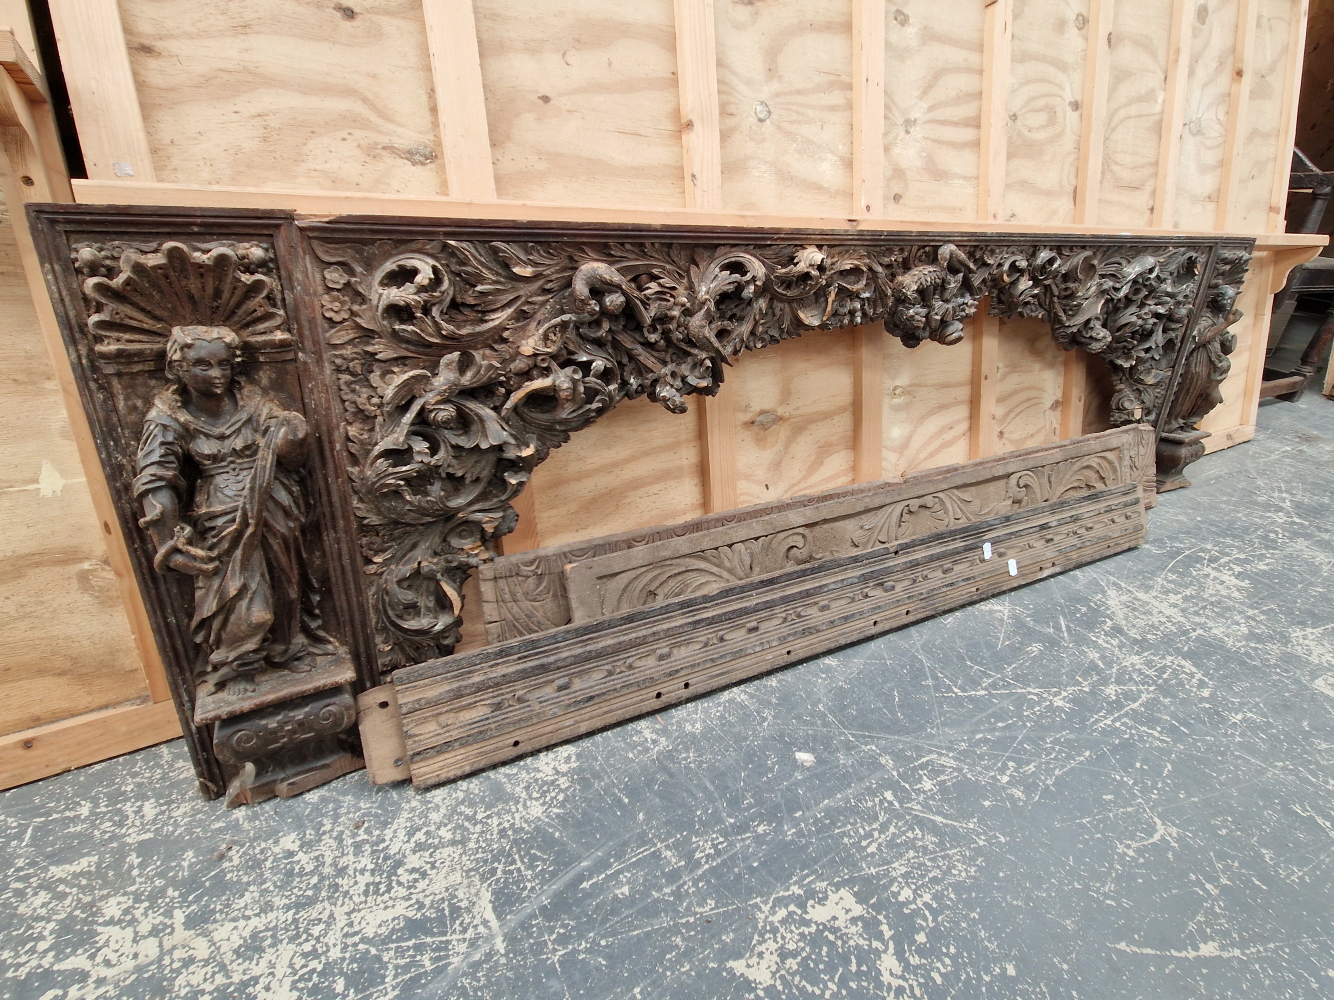 AN ANTIQUE 18TH/19TH CENTURY FRIEZE ARCH CARVED IN DELICATE DEEP RELIEF. - Image 2 of 10